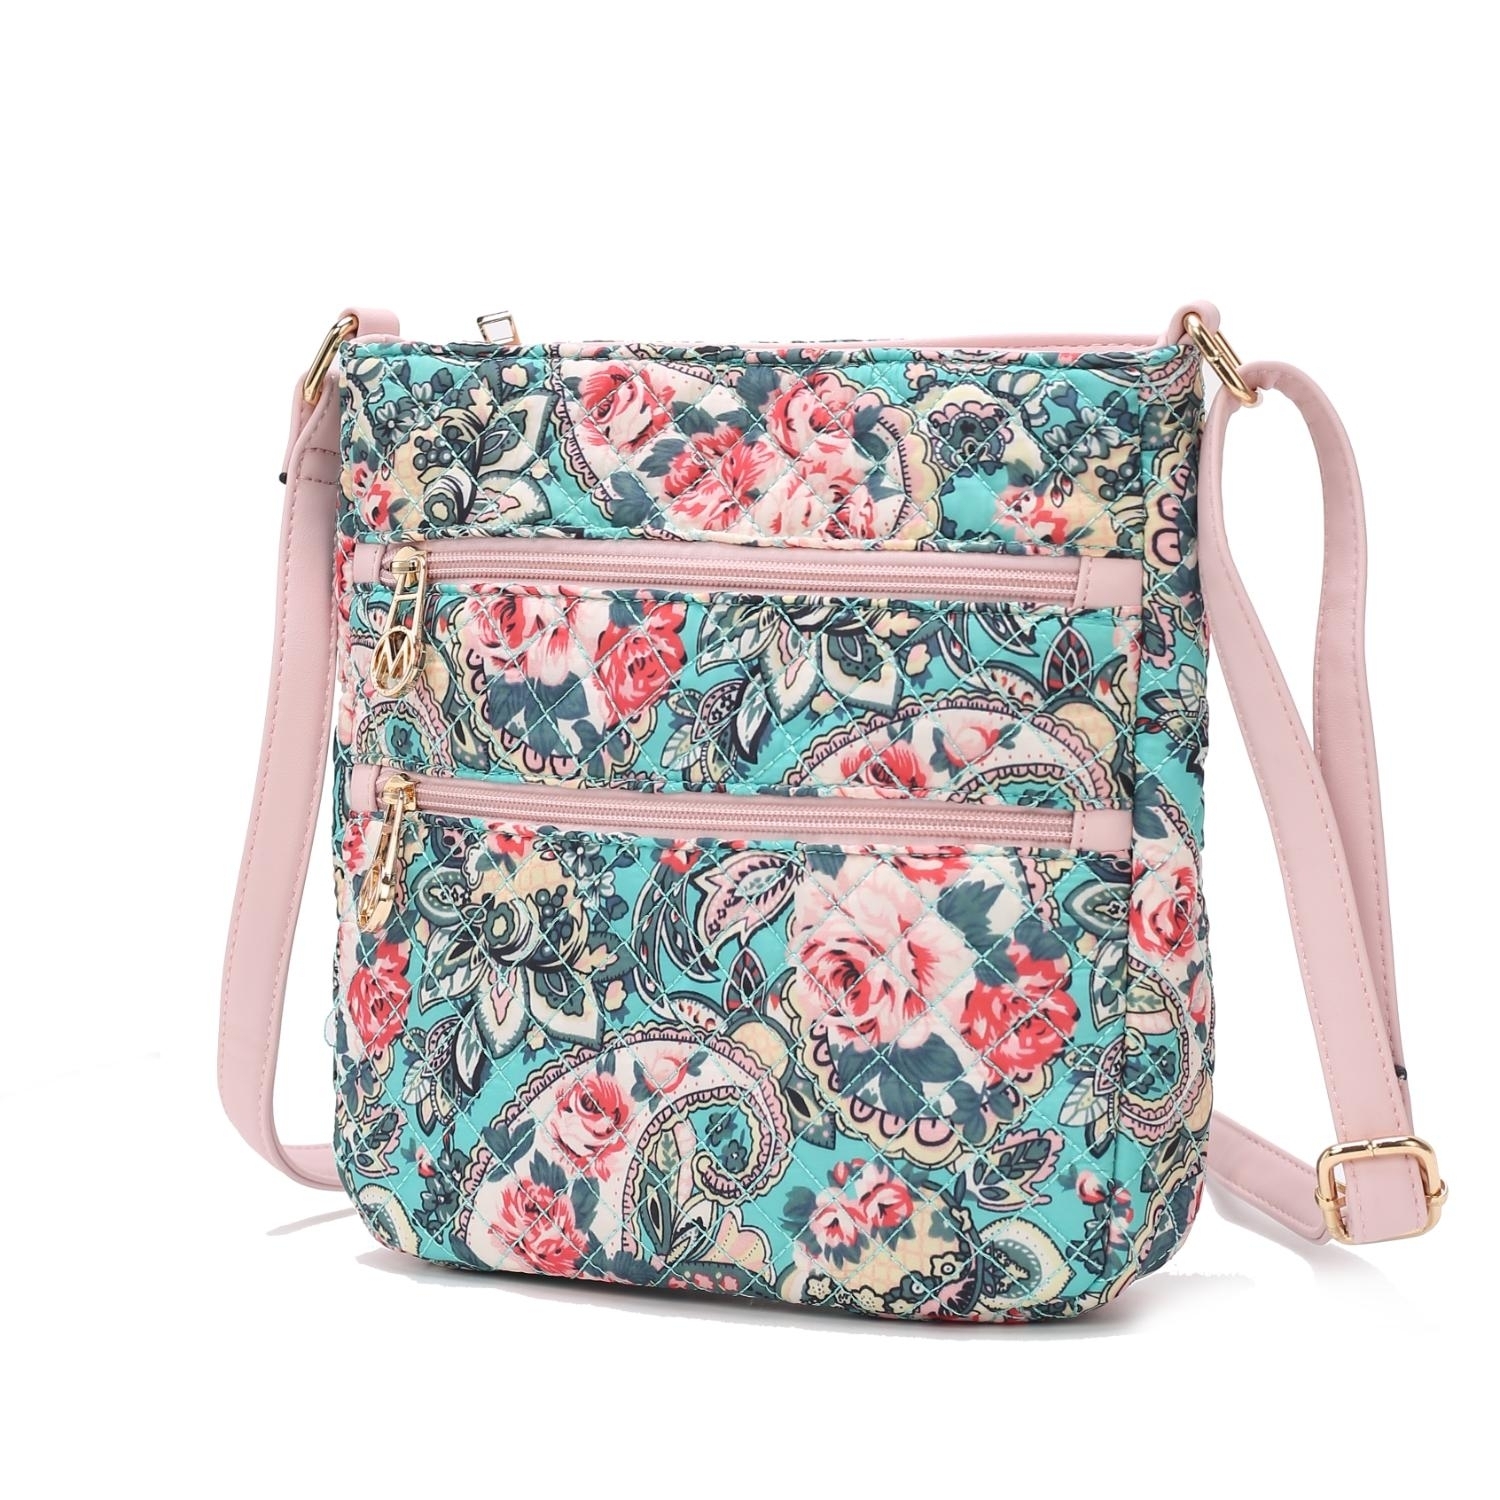 MKF Collection Lainey Quilted Cotton Botanical Pattern Women's Crossbody By Mia K - Green